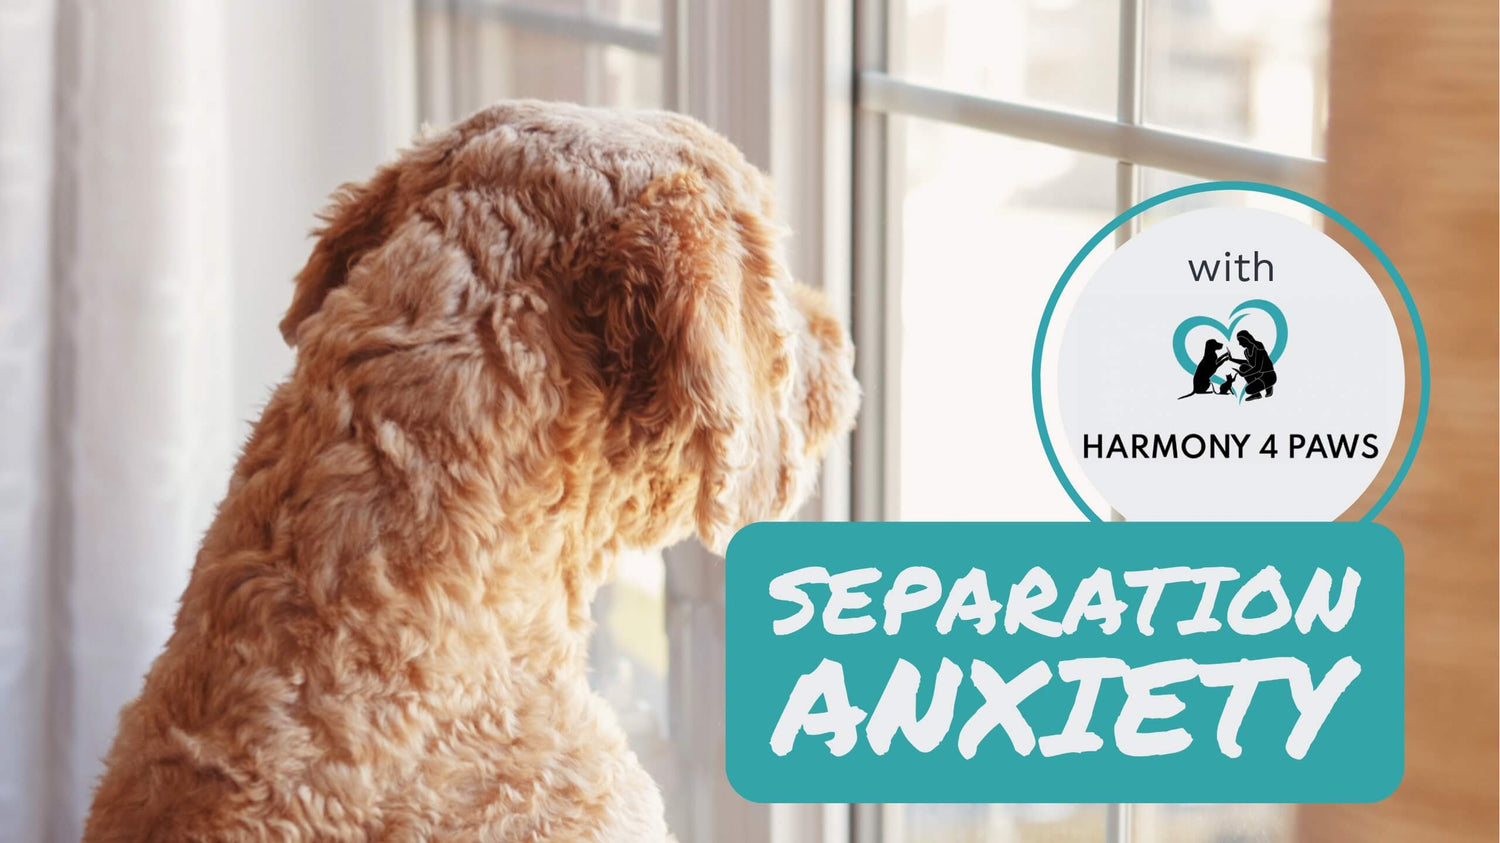 A dogs from behind looking out of a window waiting for his human and a box with text “Separation Anxiety”